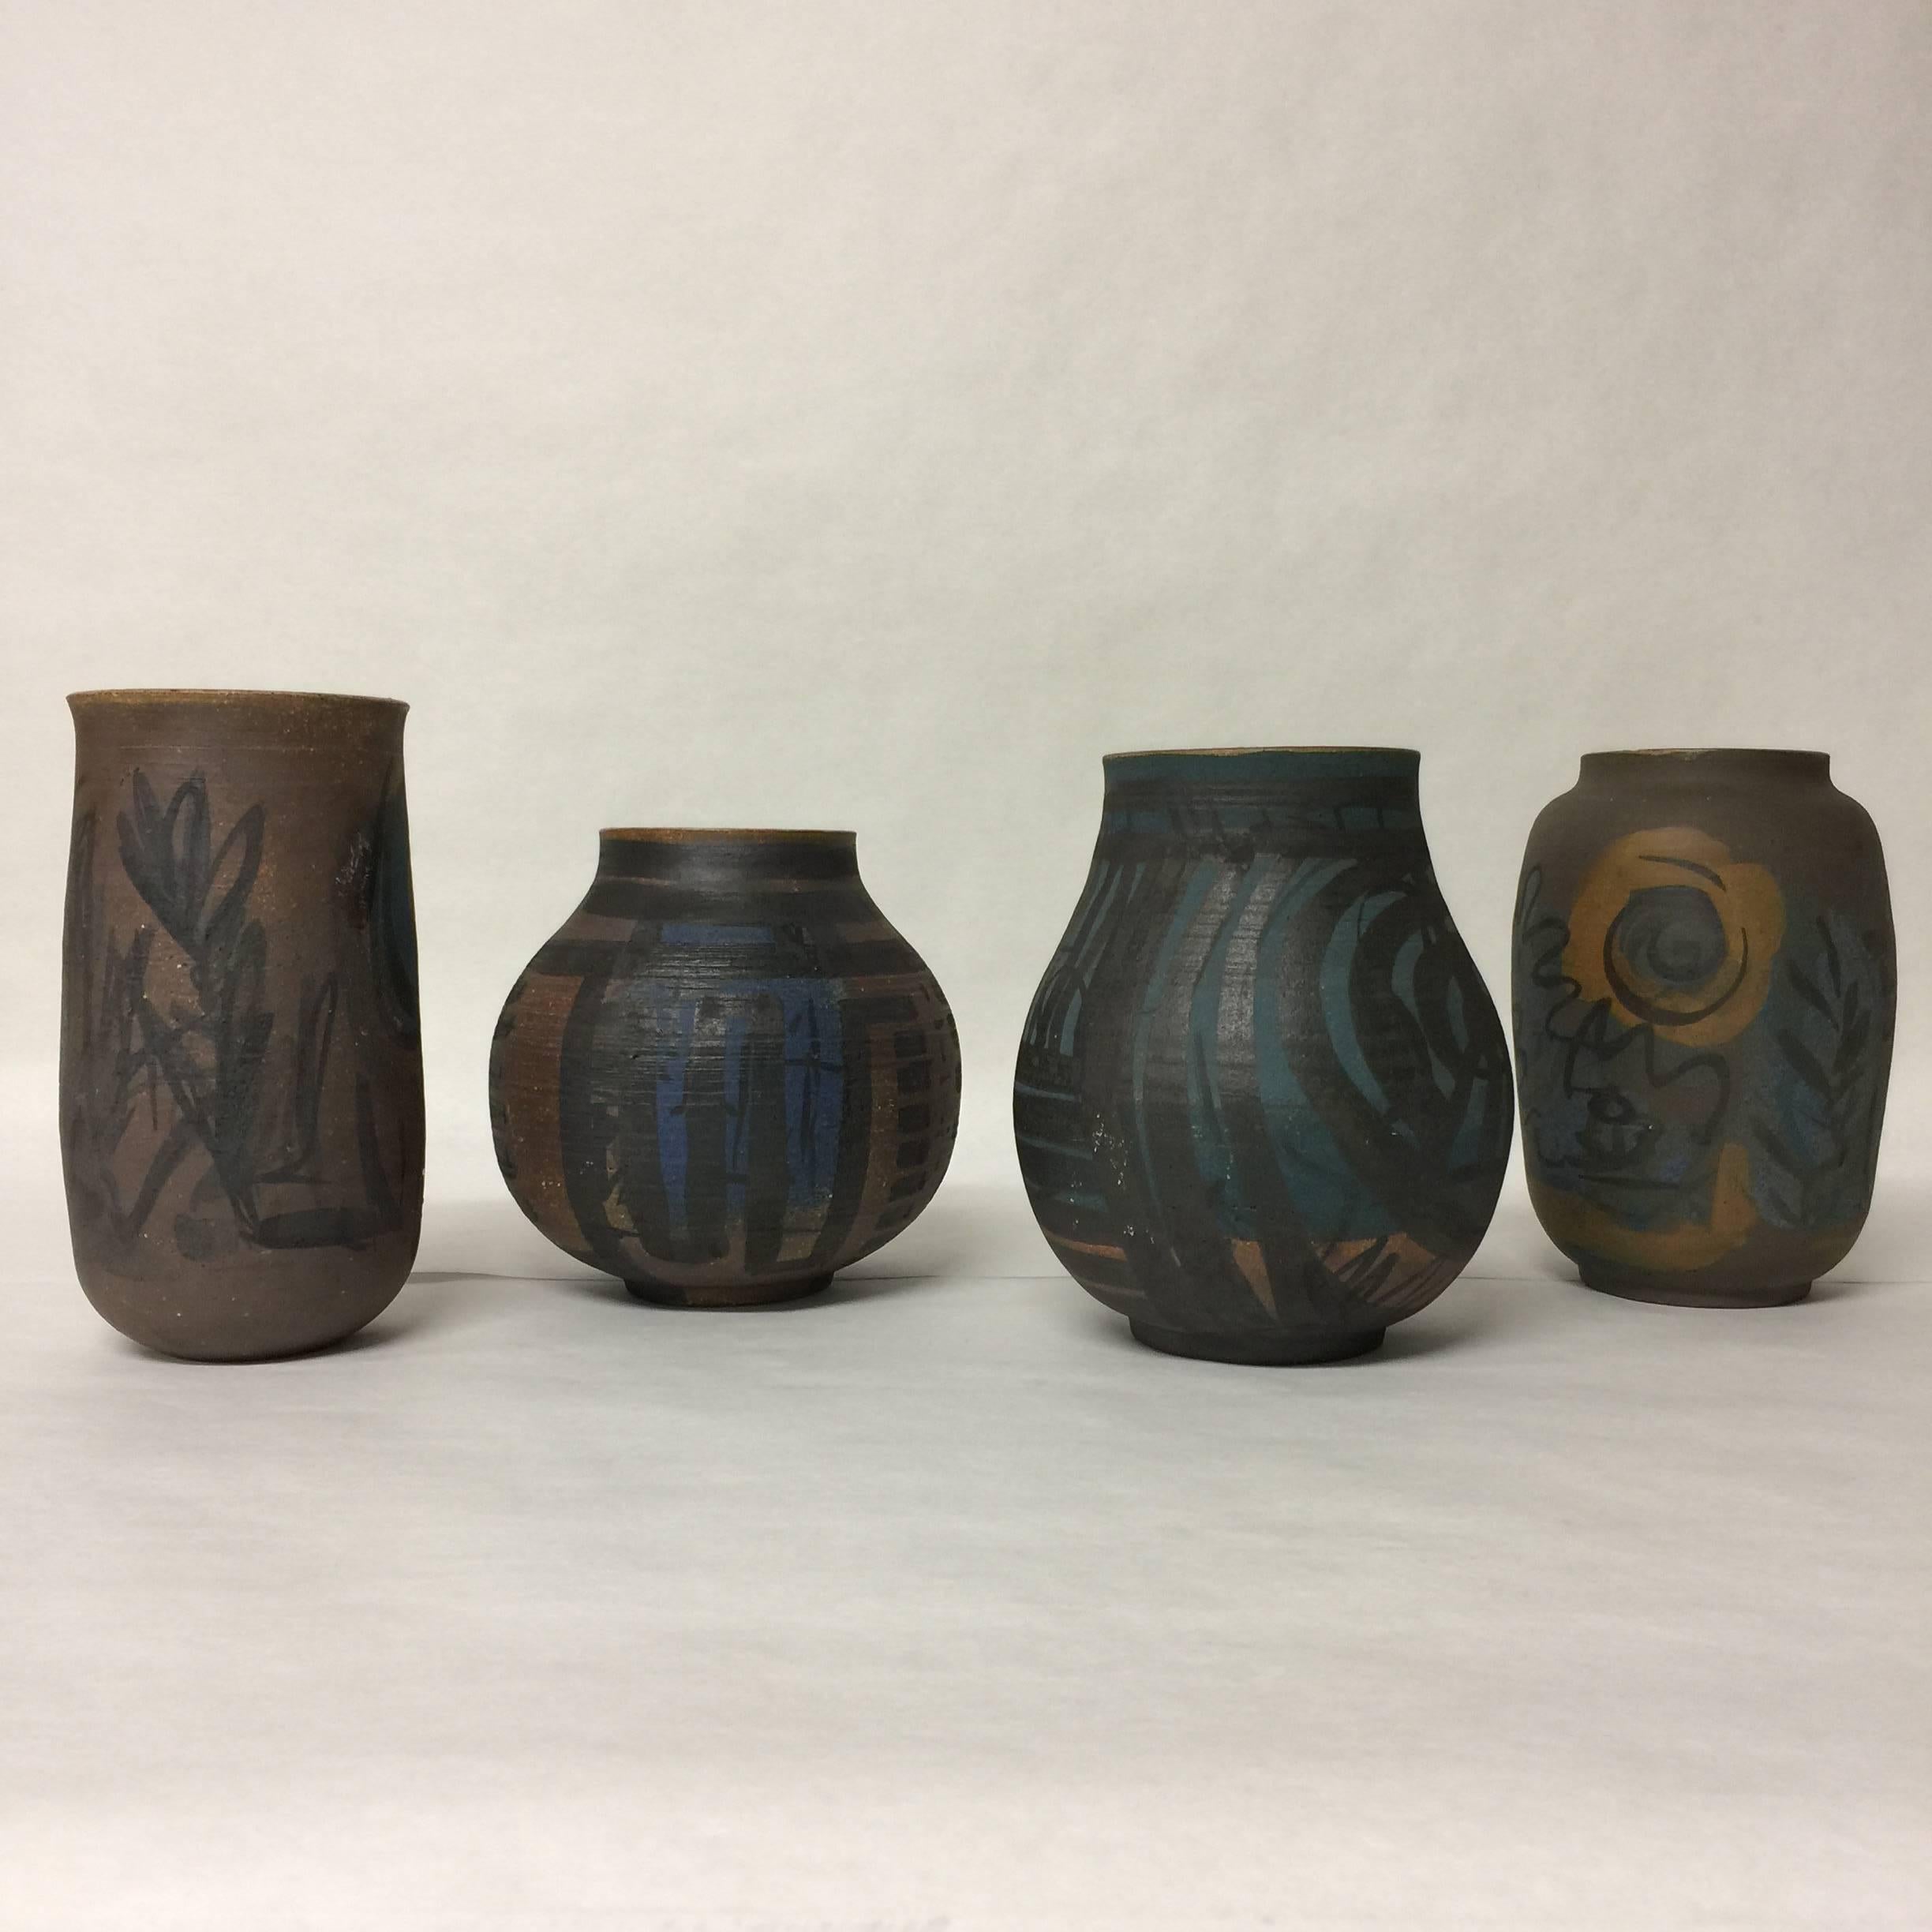 An assembled collection of four abstract hand-painted stoneware pottery vessels or vases with the outer surface being matte and the inner surface having a glaze. Measurements in order from left to right: Tallest 8.25